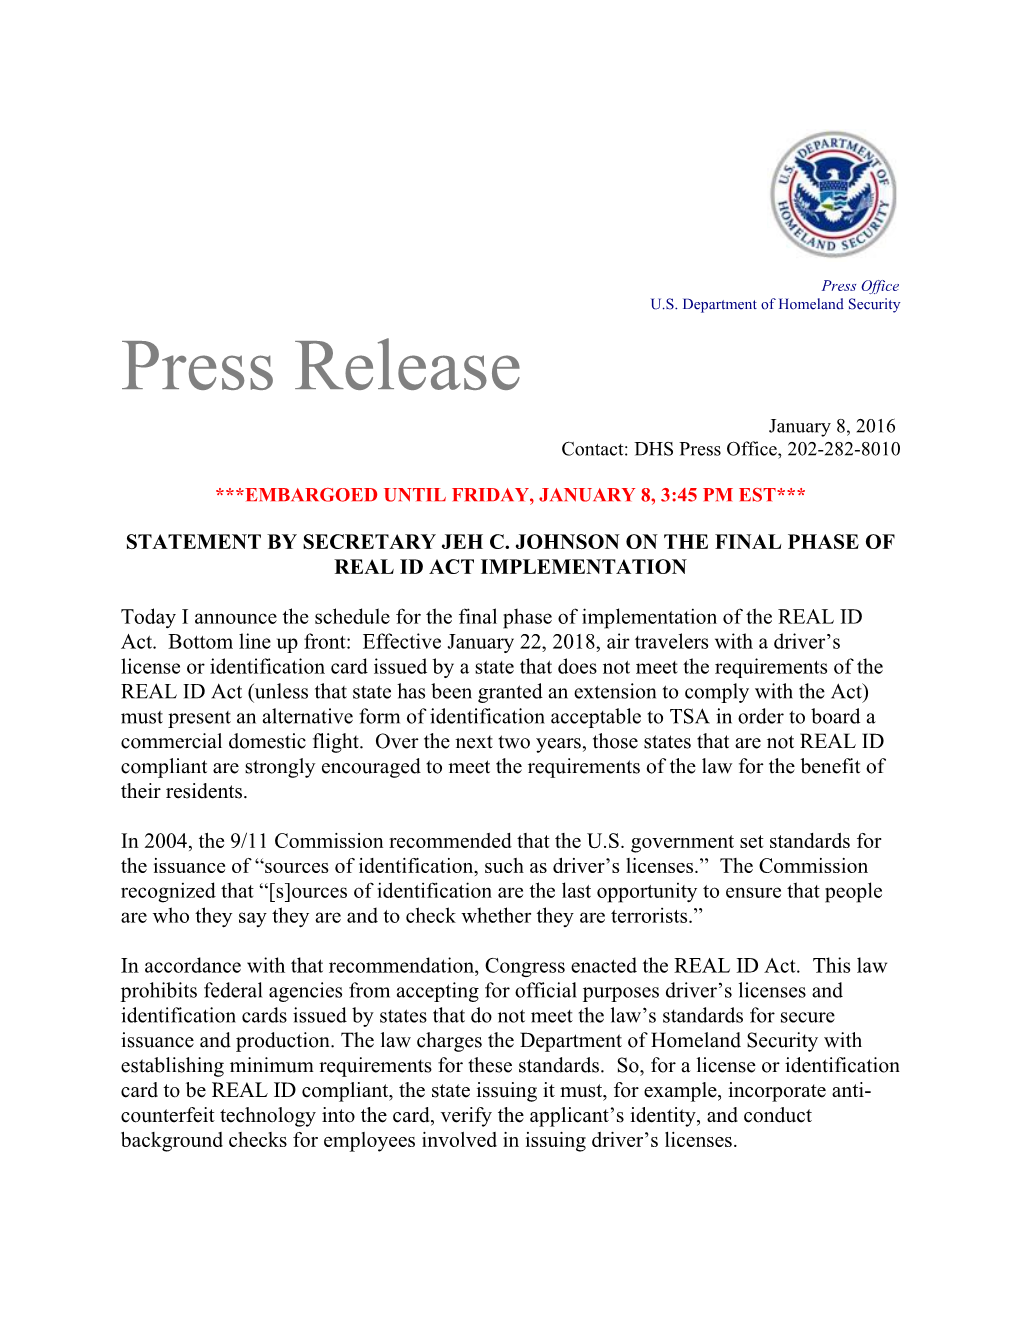 Statement by Secretary Jeh C. Johnson on the Final Phase of Real Id Act Implementation